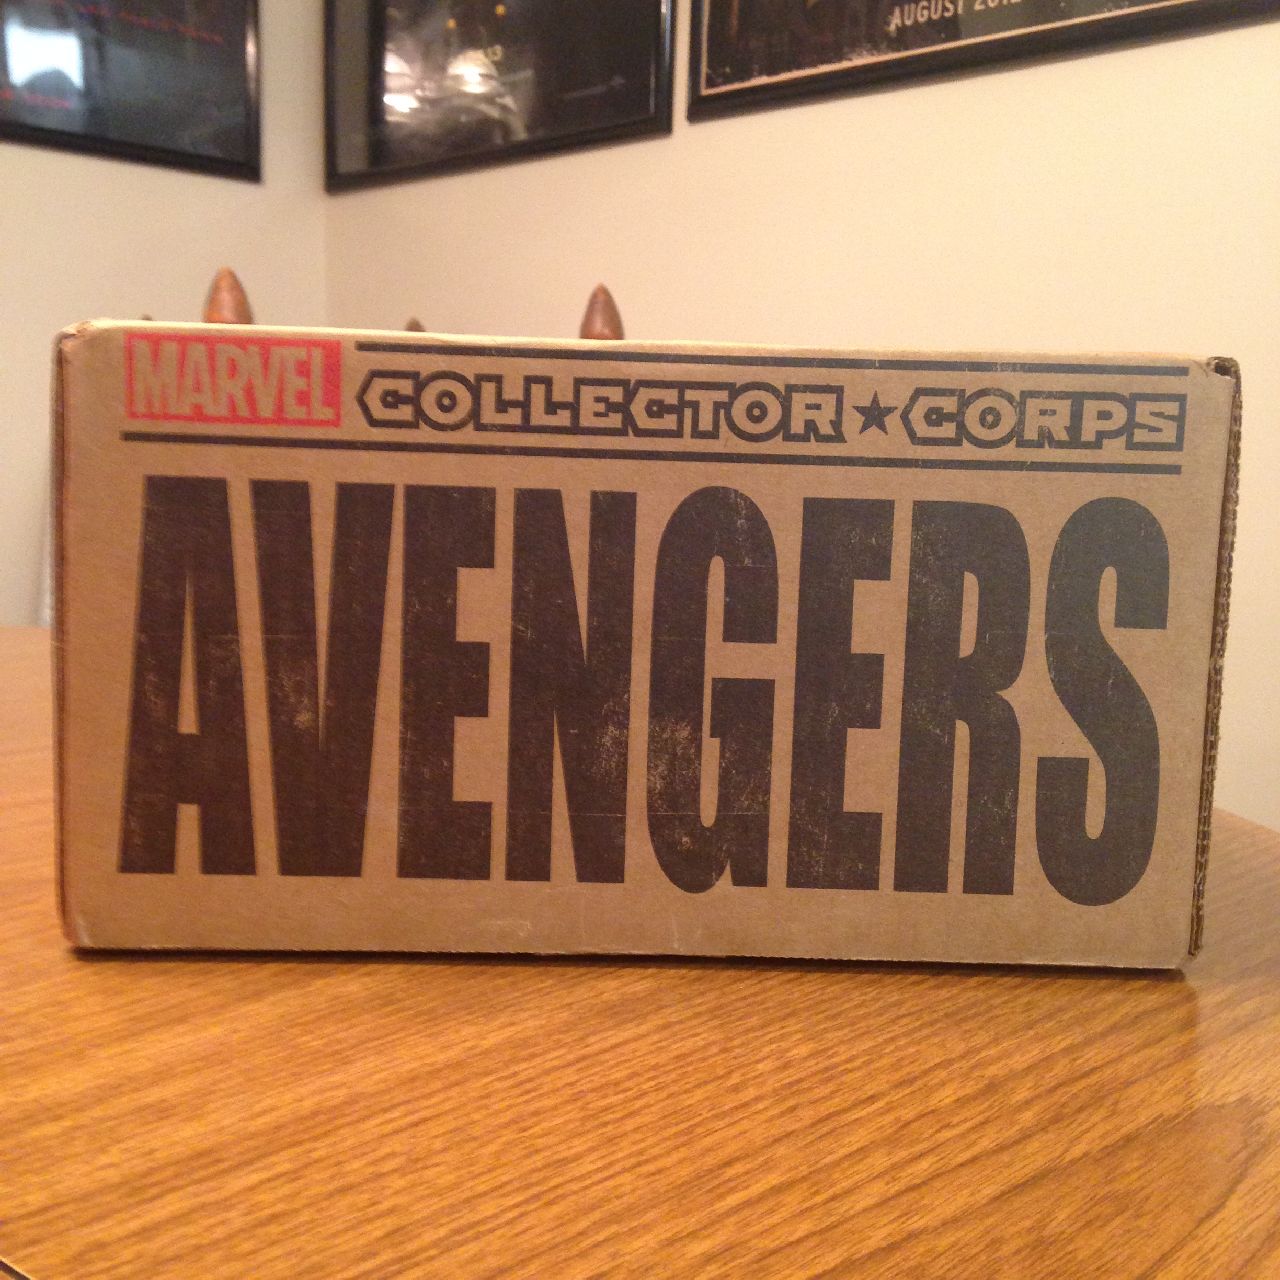 Marvel Collector Corps April Box